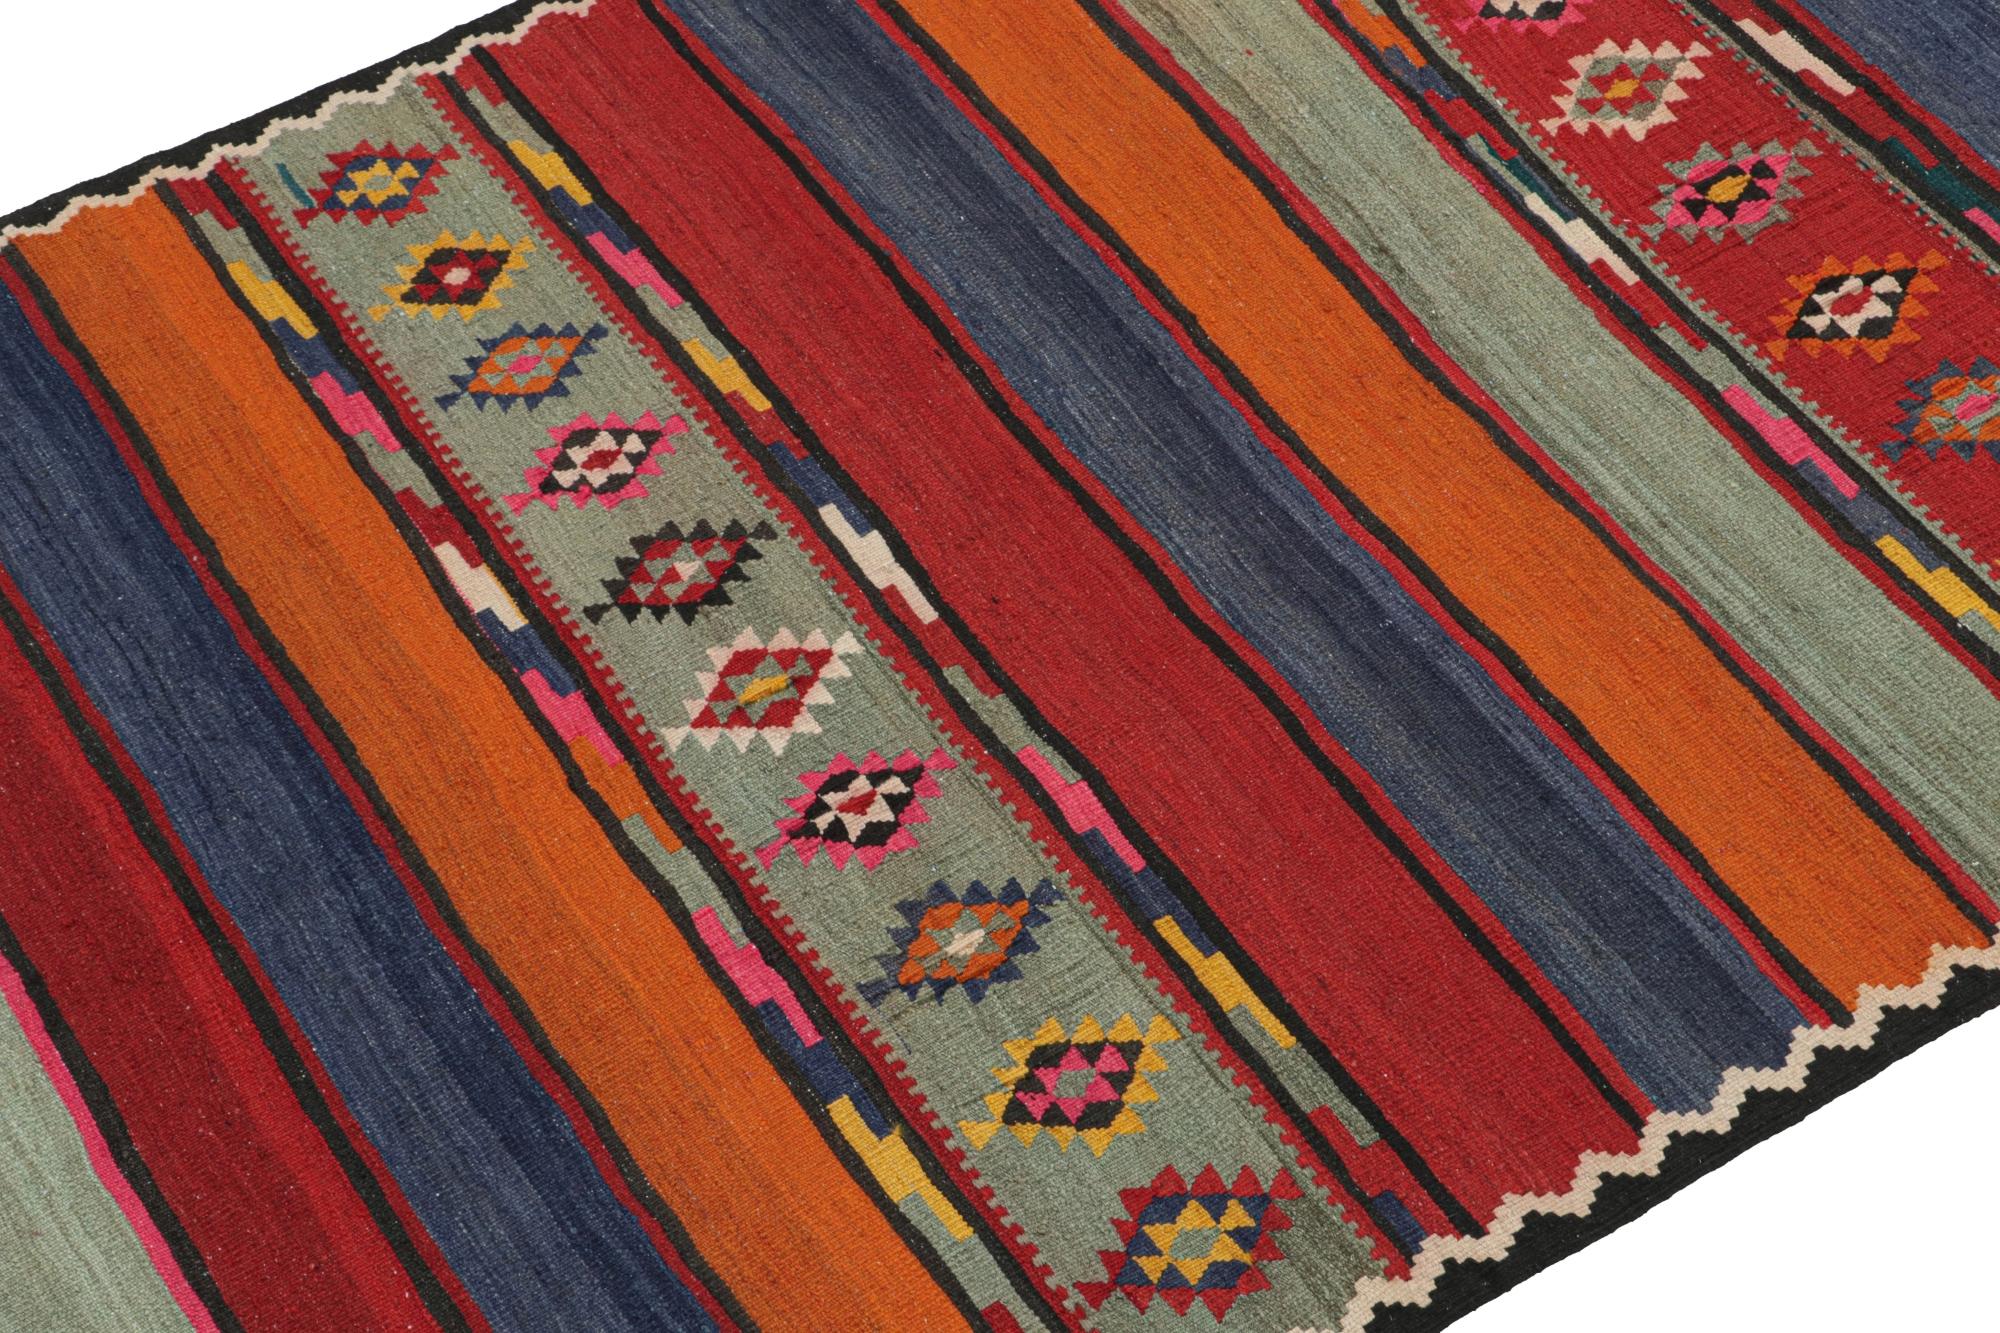 This vintage 5x11 Persian Kilim is a tribal rug from Meshkin—a small northwestern village known for its fabulous works. Handwoven in wool, it originates circa 1950-1960. 

Further on the Design:

Its design reads a complementary play of